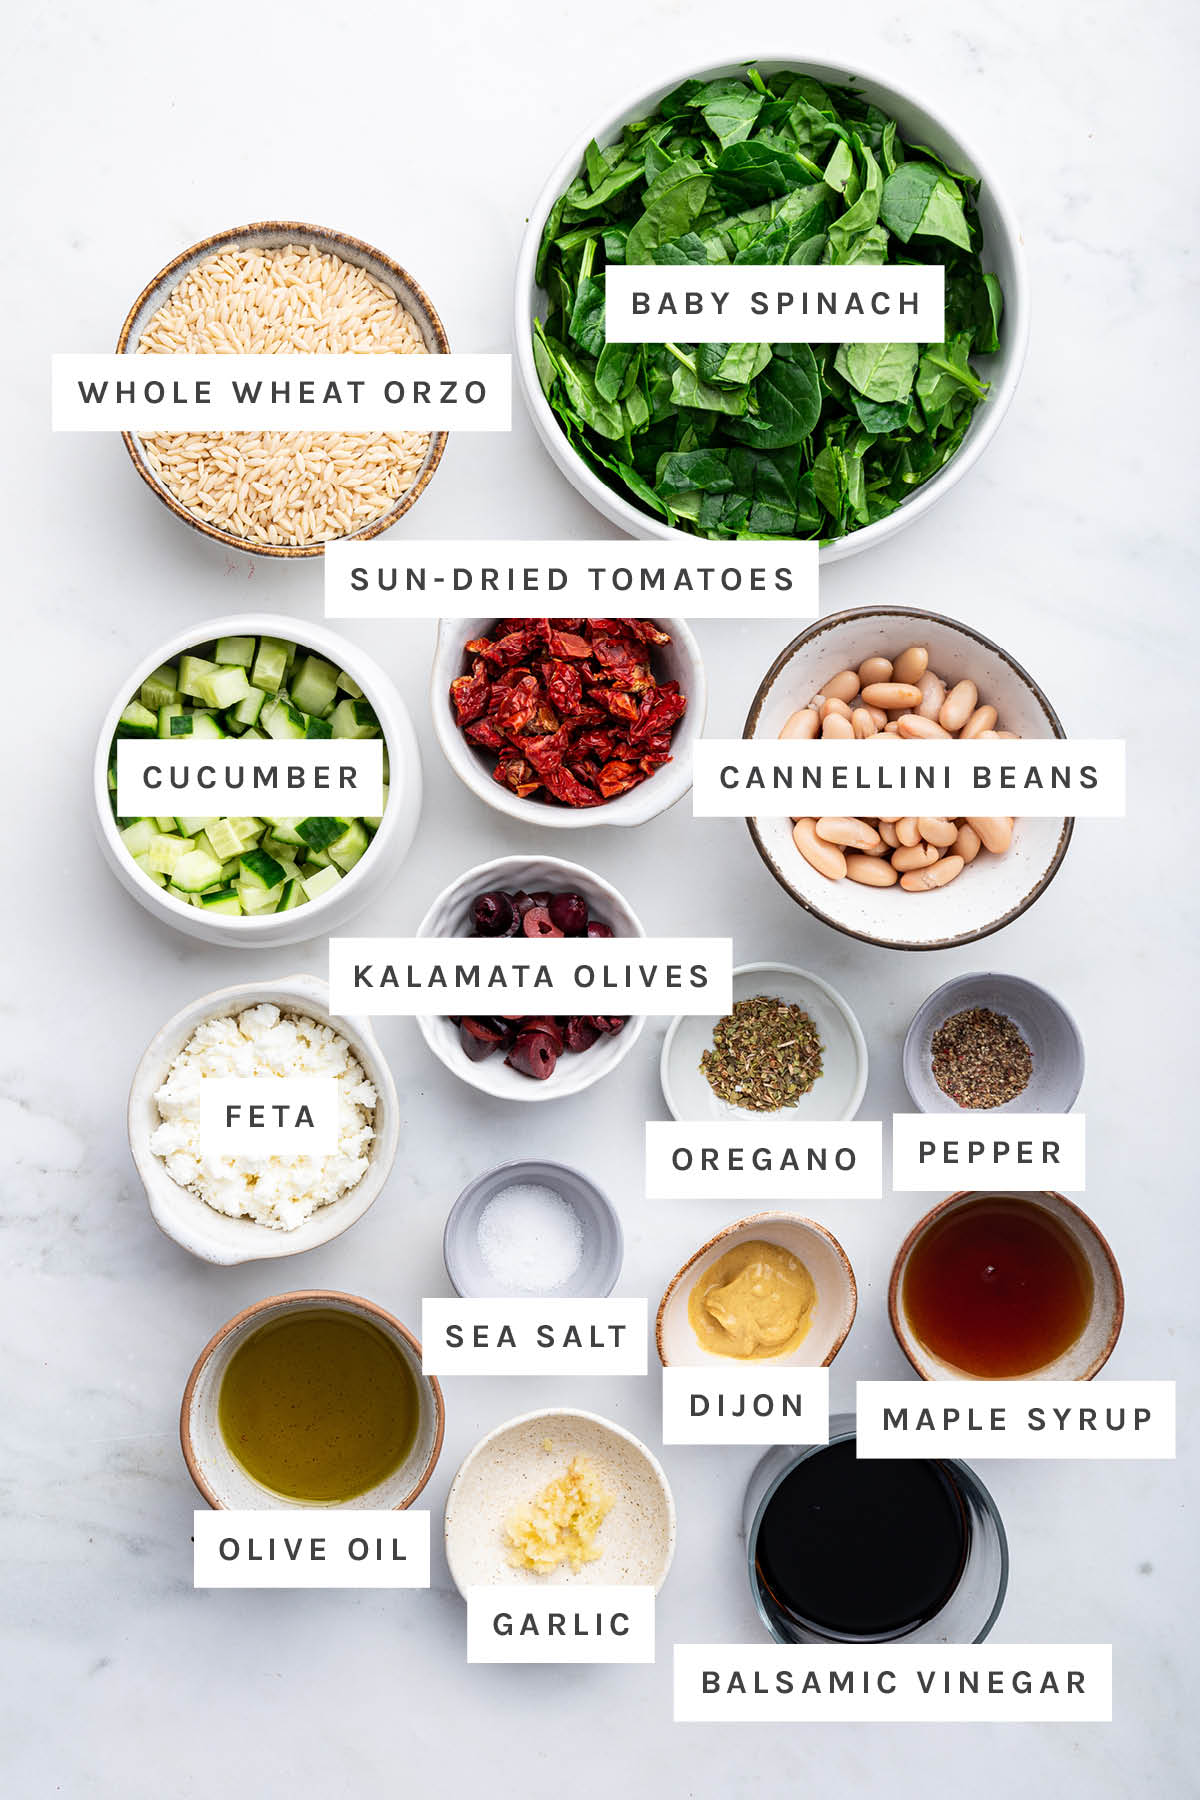 Ingredients measured out to make Mediterranean Orzo Salad: whole wheat orzo, baby spinach, sun-dried tomatoes, cucumber, cannellini beans, kalamata olives, feta, sea salt, oregano, pepper, olive oil, garlic, maple syrup and balsamic vinegar.